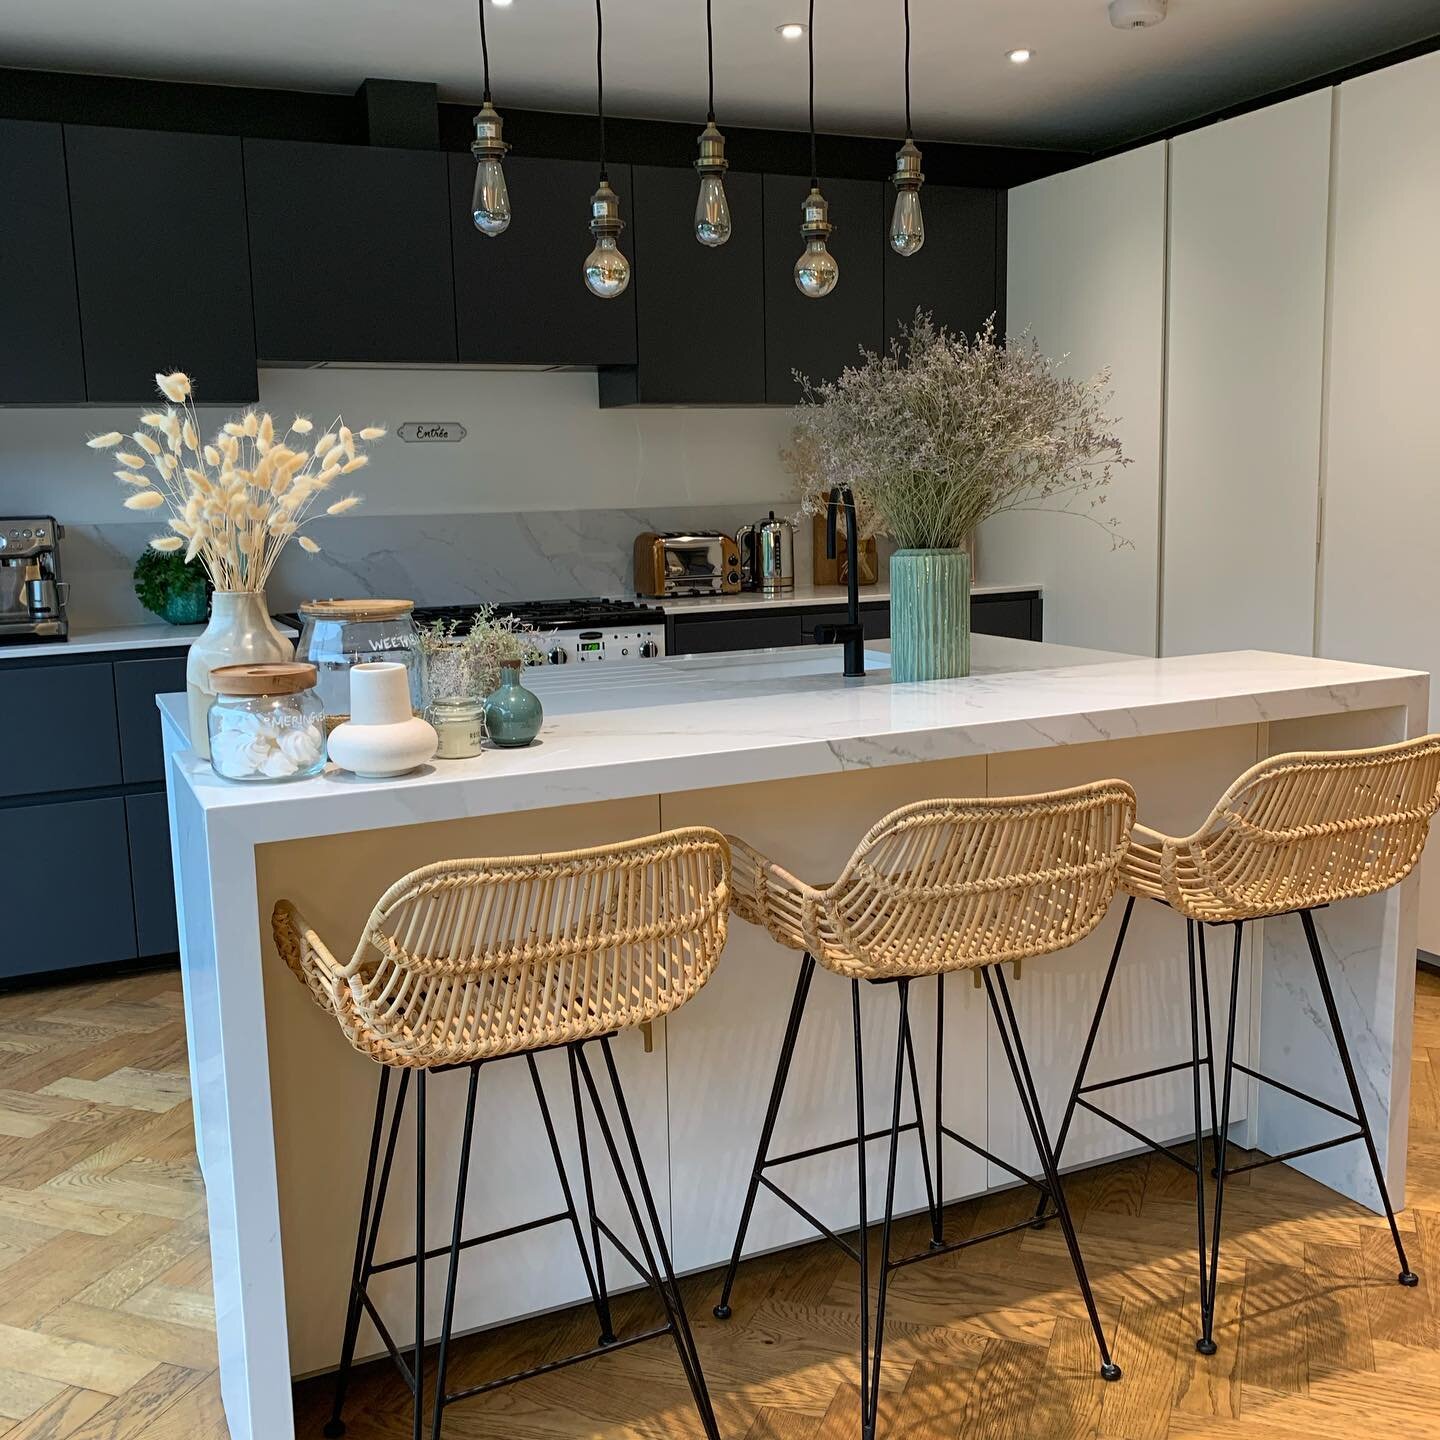 When we went to look at this house I always knew we would change the space and the layout and believe it or not the kitchen used to be a dining room and a bedroom! With the help of our amazing architect @ciao_archi we were able to repurpose most of t